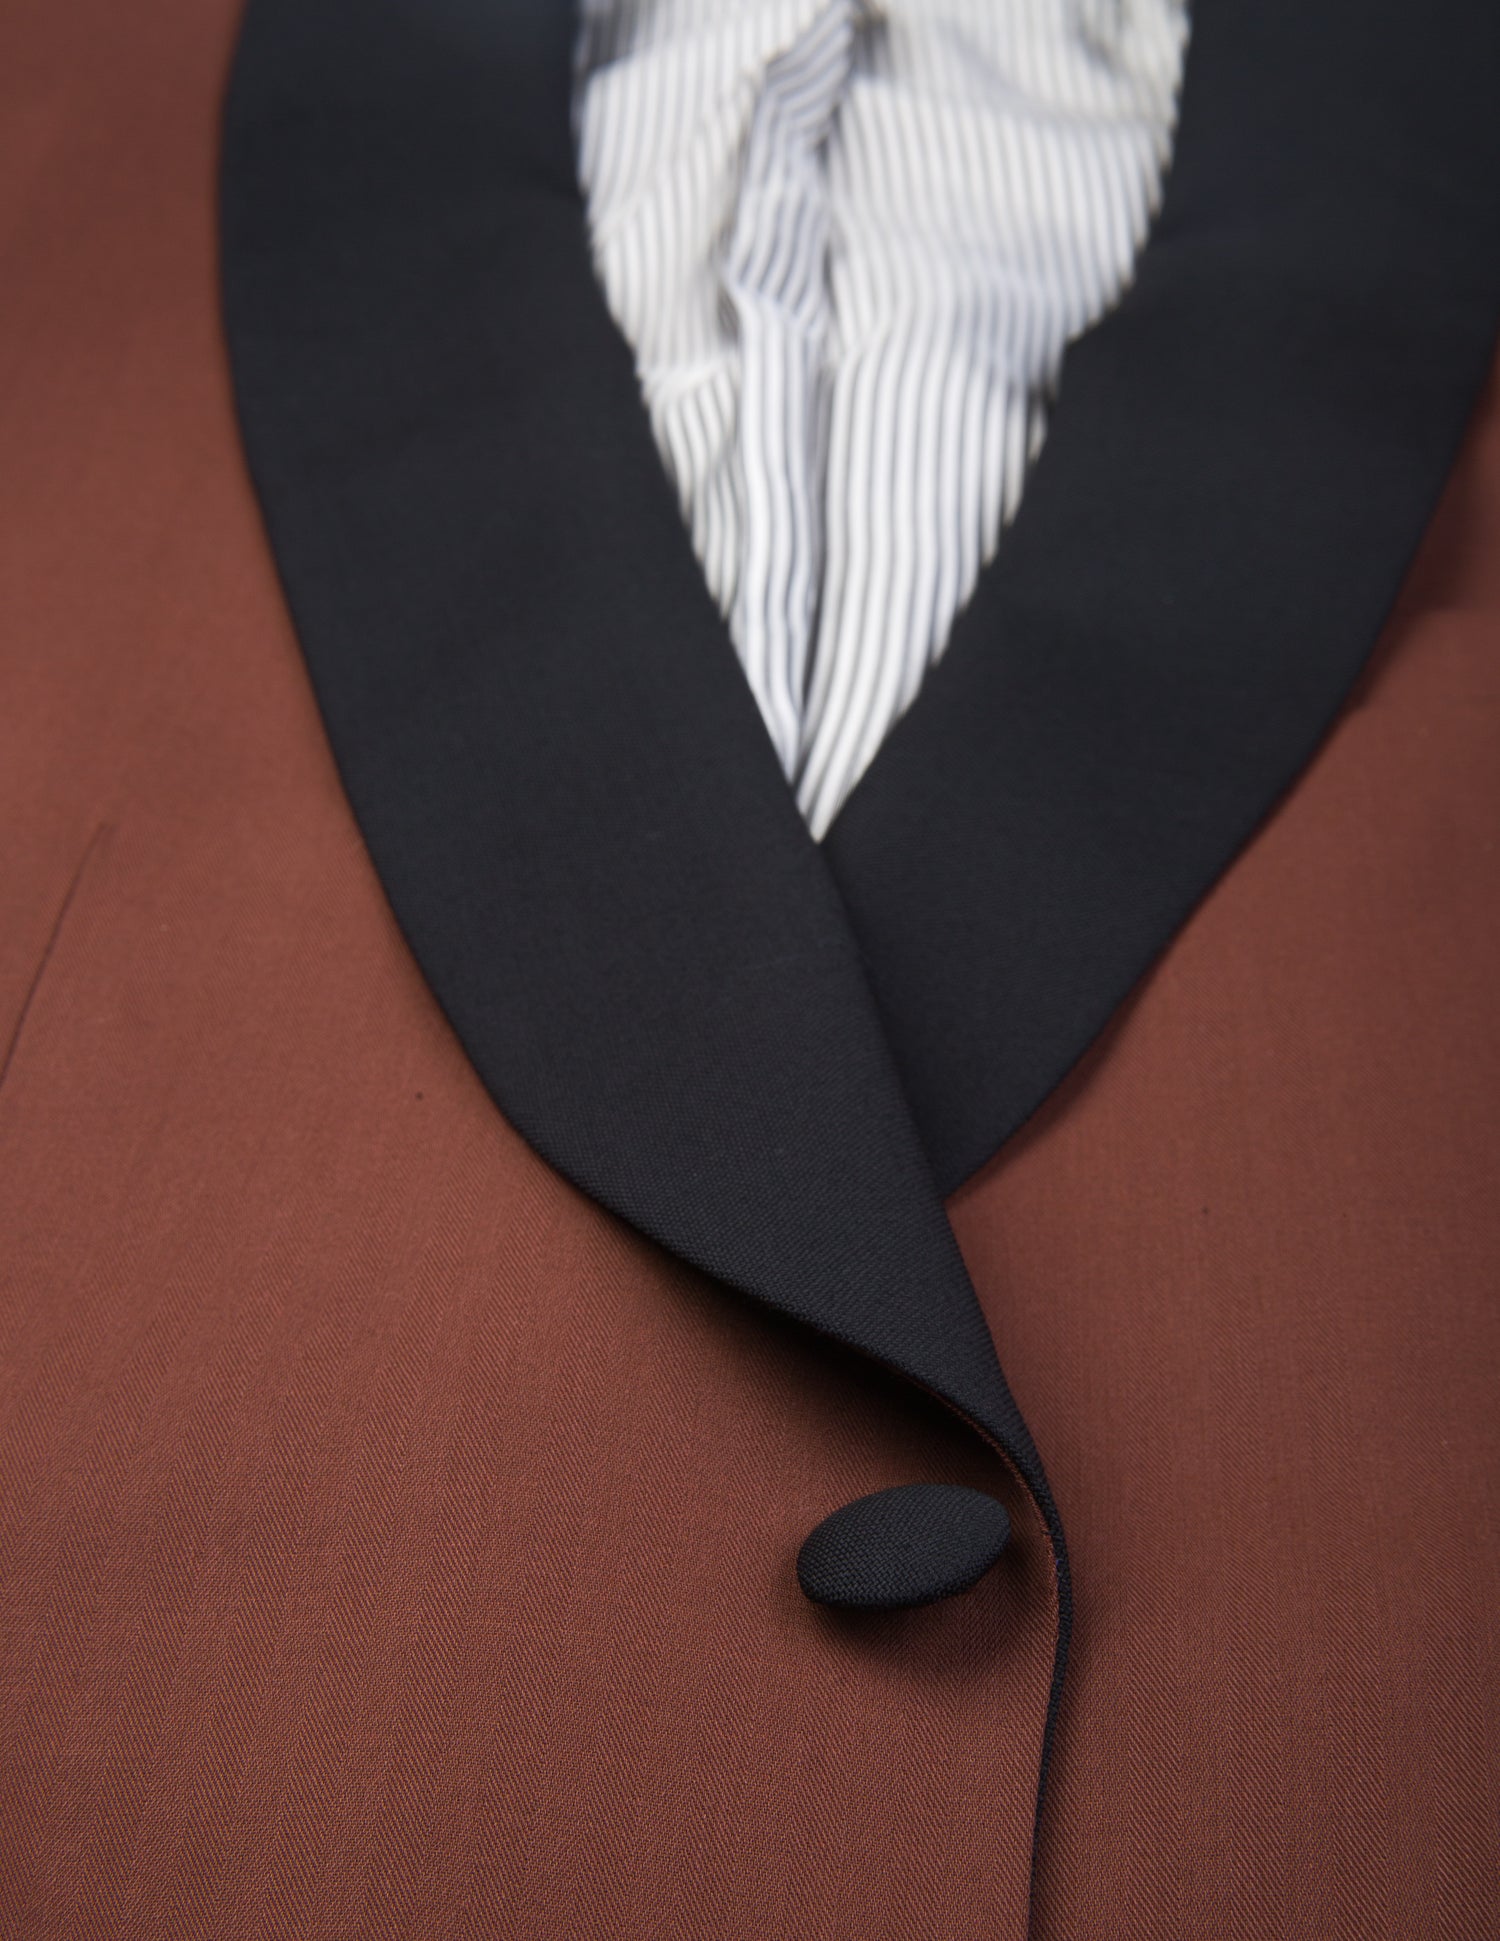 Detail shot of Brooklyn Tailors BKT50 Shawl Collar Dinner Jacket in Herringbone Wool/Cotton - Brick showing lapel, button closure, and lining